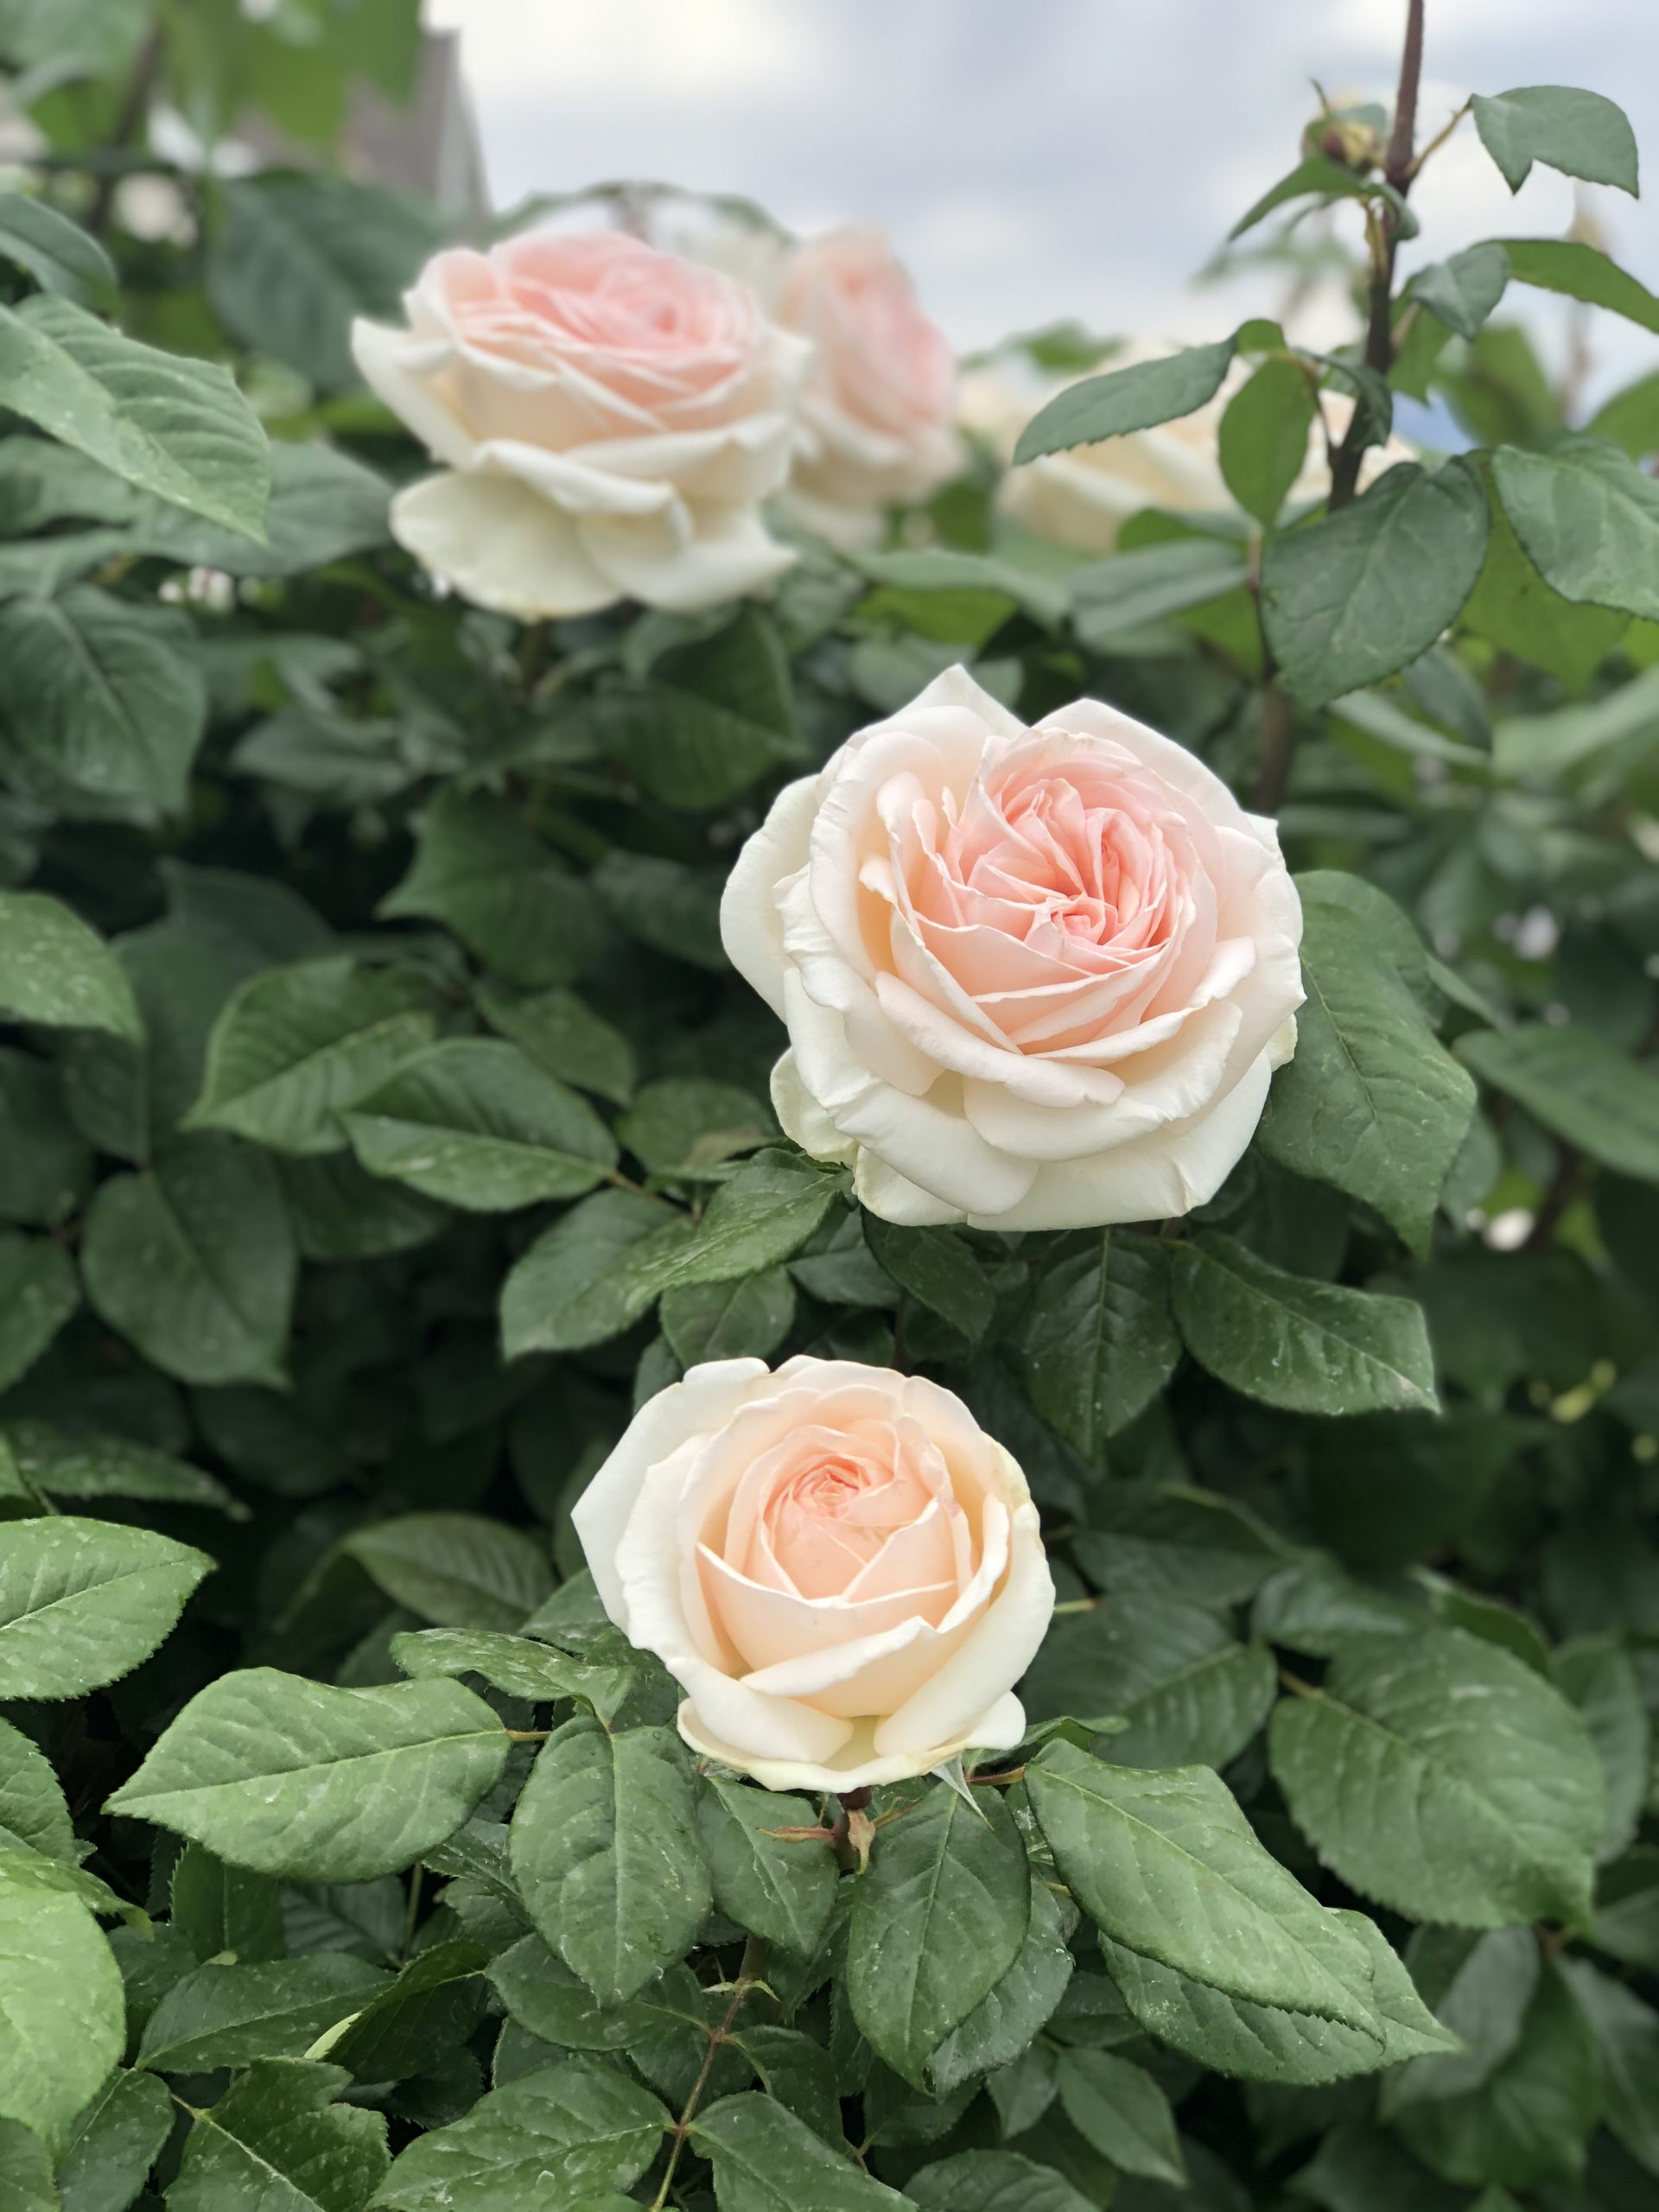 How To Prune Your Rose Bush